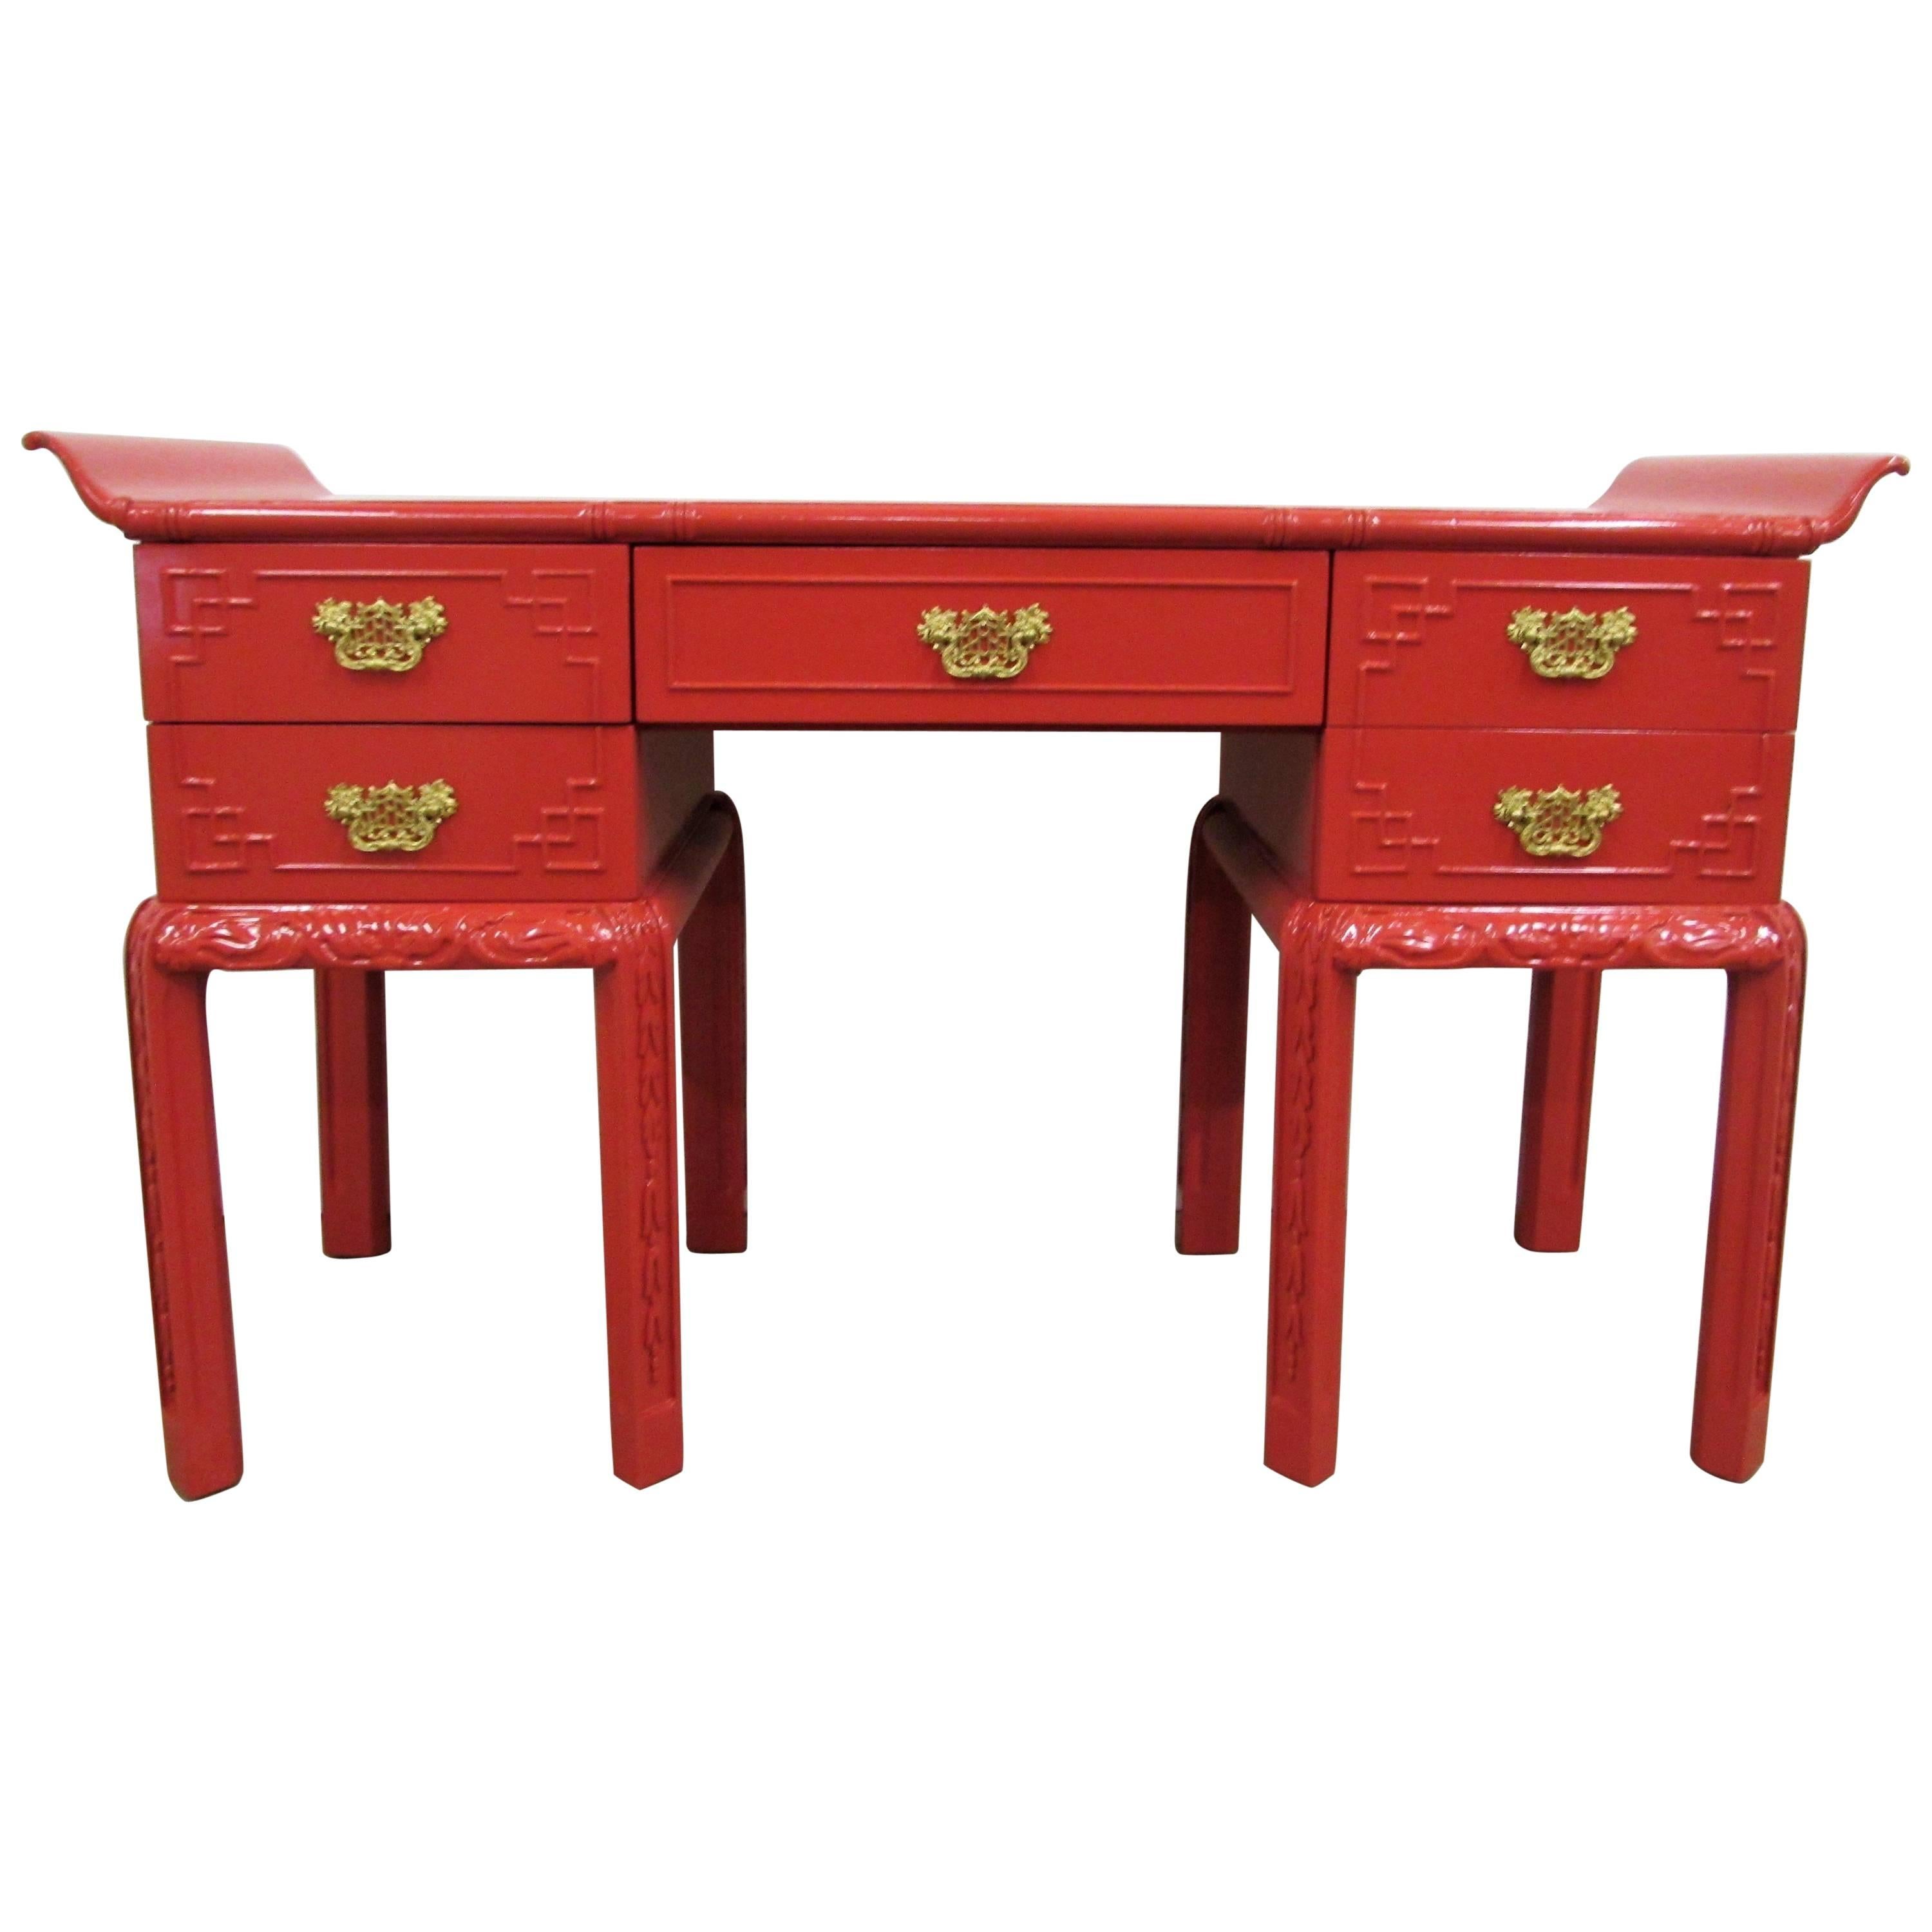 Chinoiserie Pagoda Desk or Console